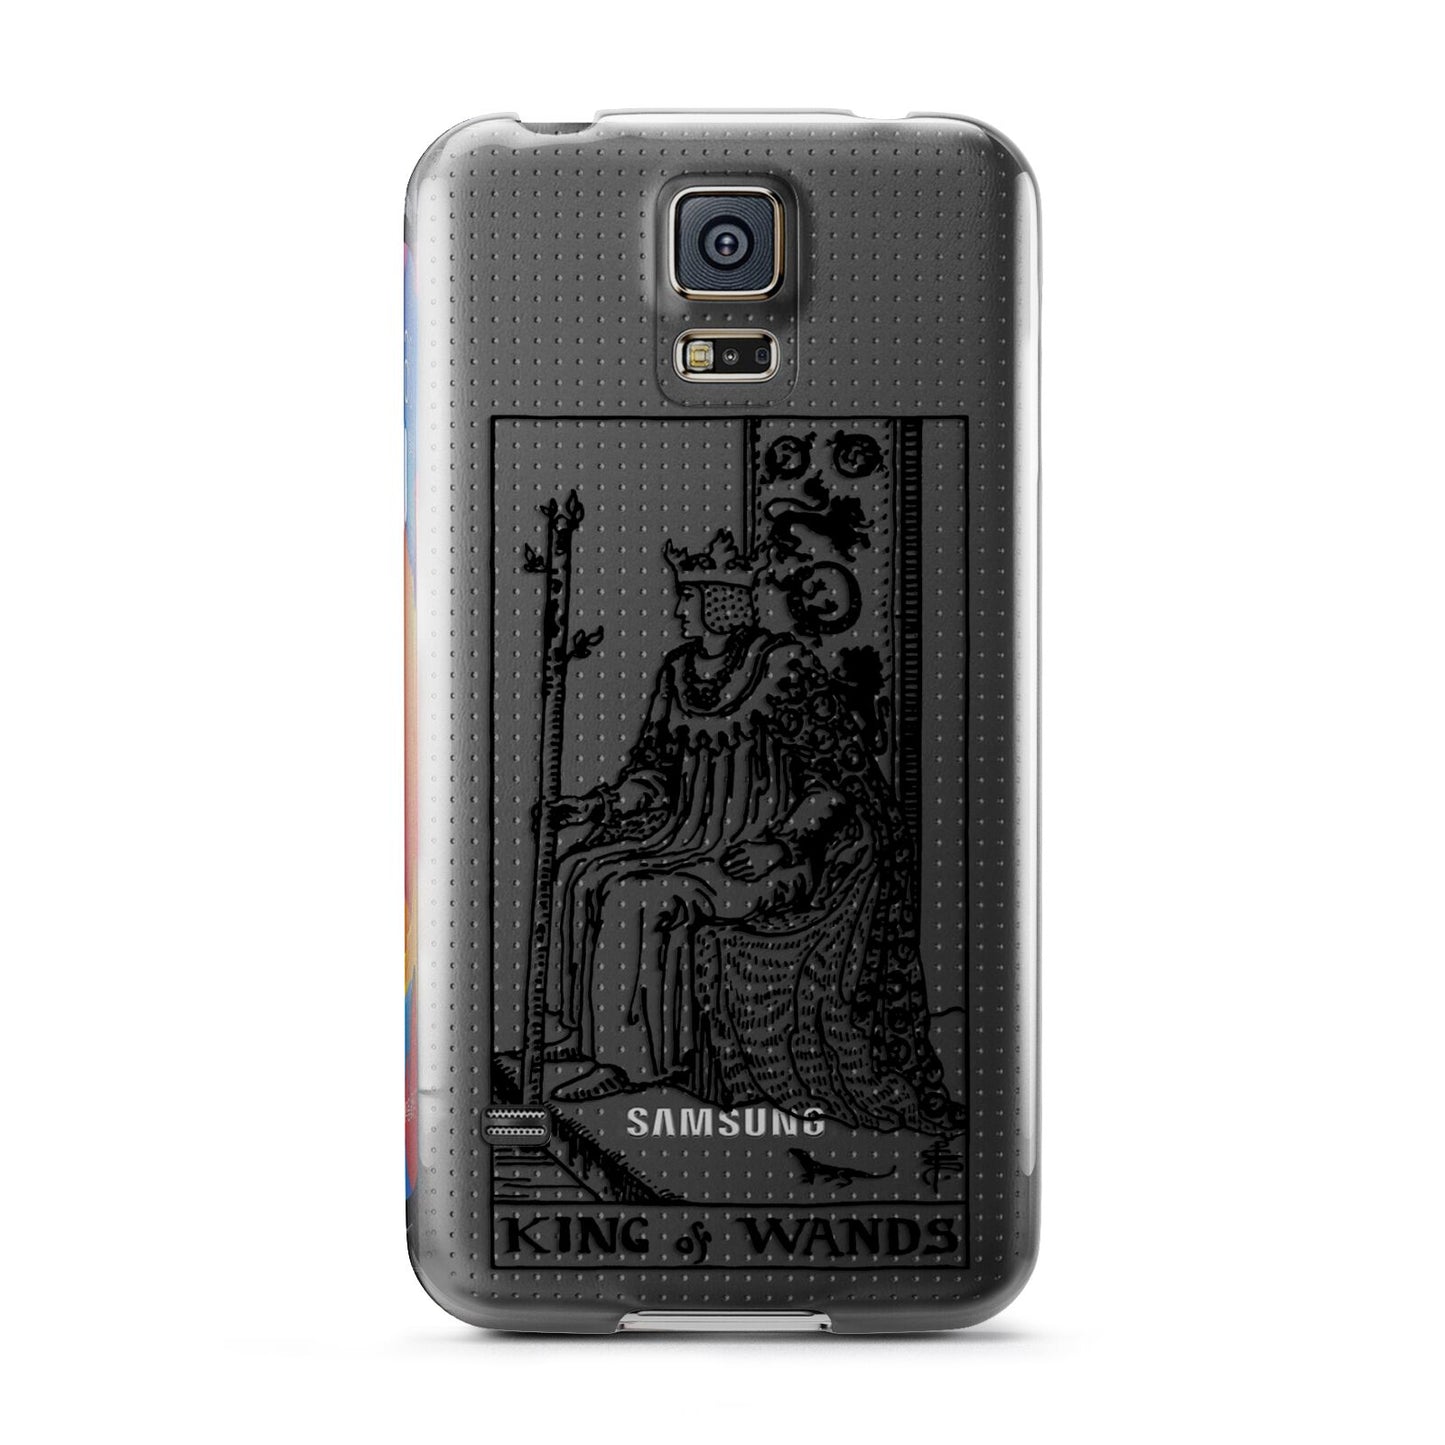 King of Wands Monochrome Samsung Galaxy S5 Case